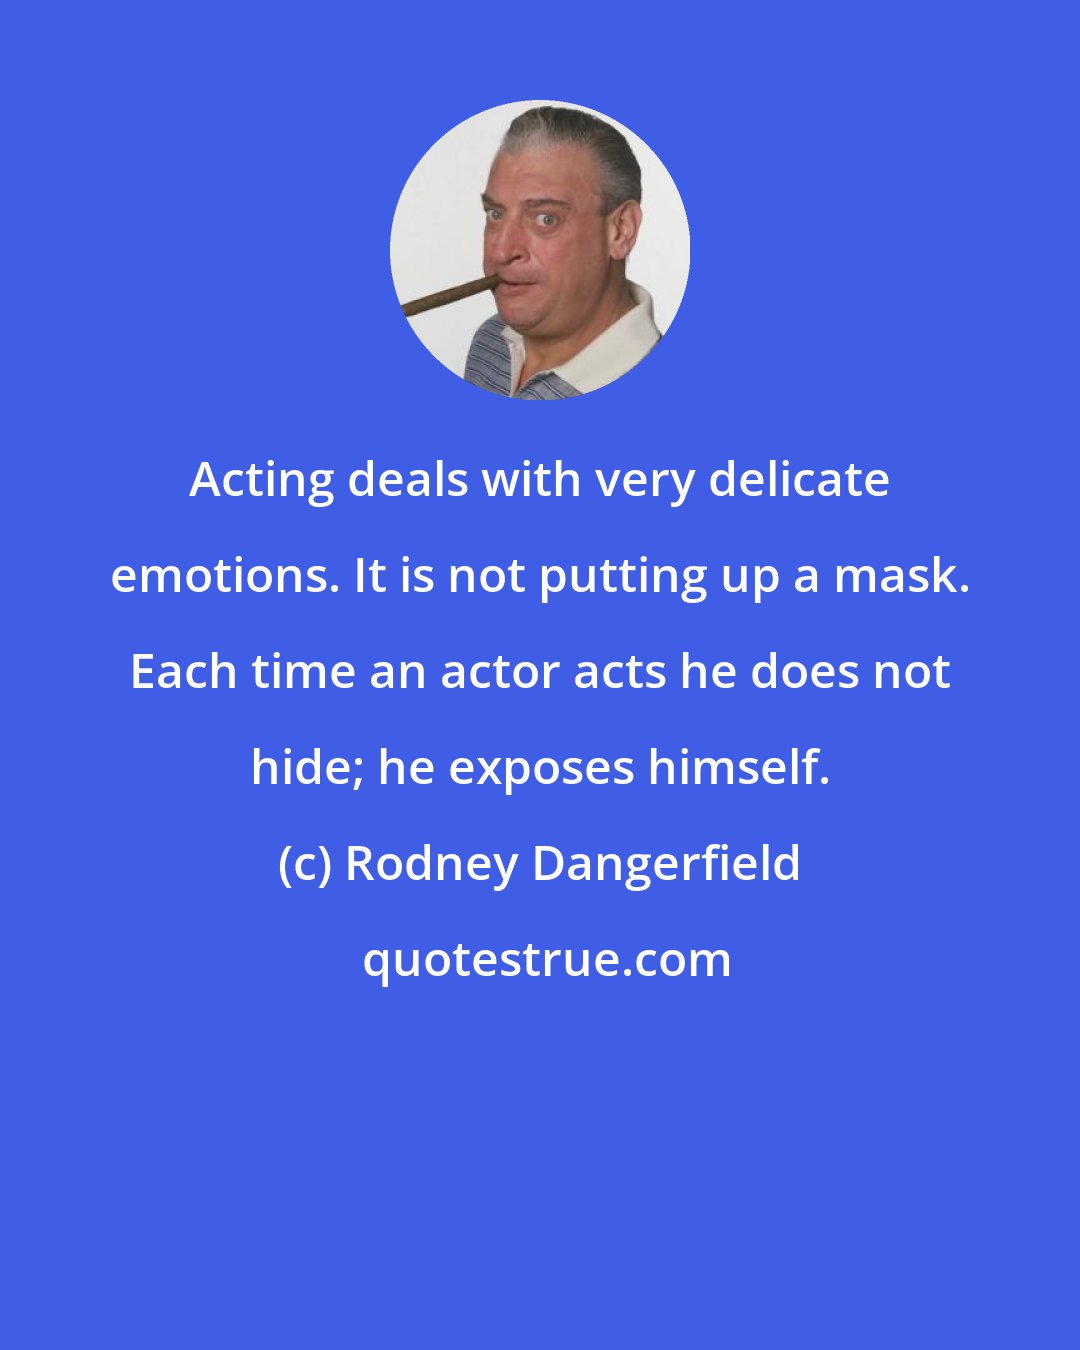 Rodney Dangerfield: Acting deals with very delicate emotions. It is not putting up a mask. Each time an actor acts he does not hide; he exposes himself.